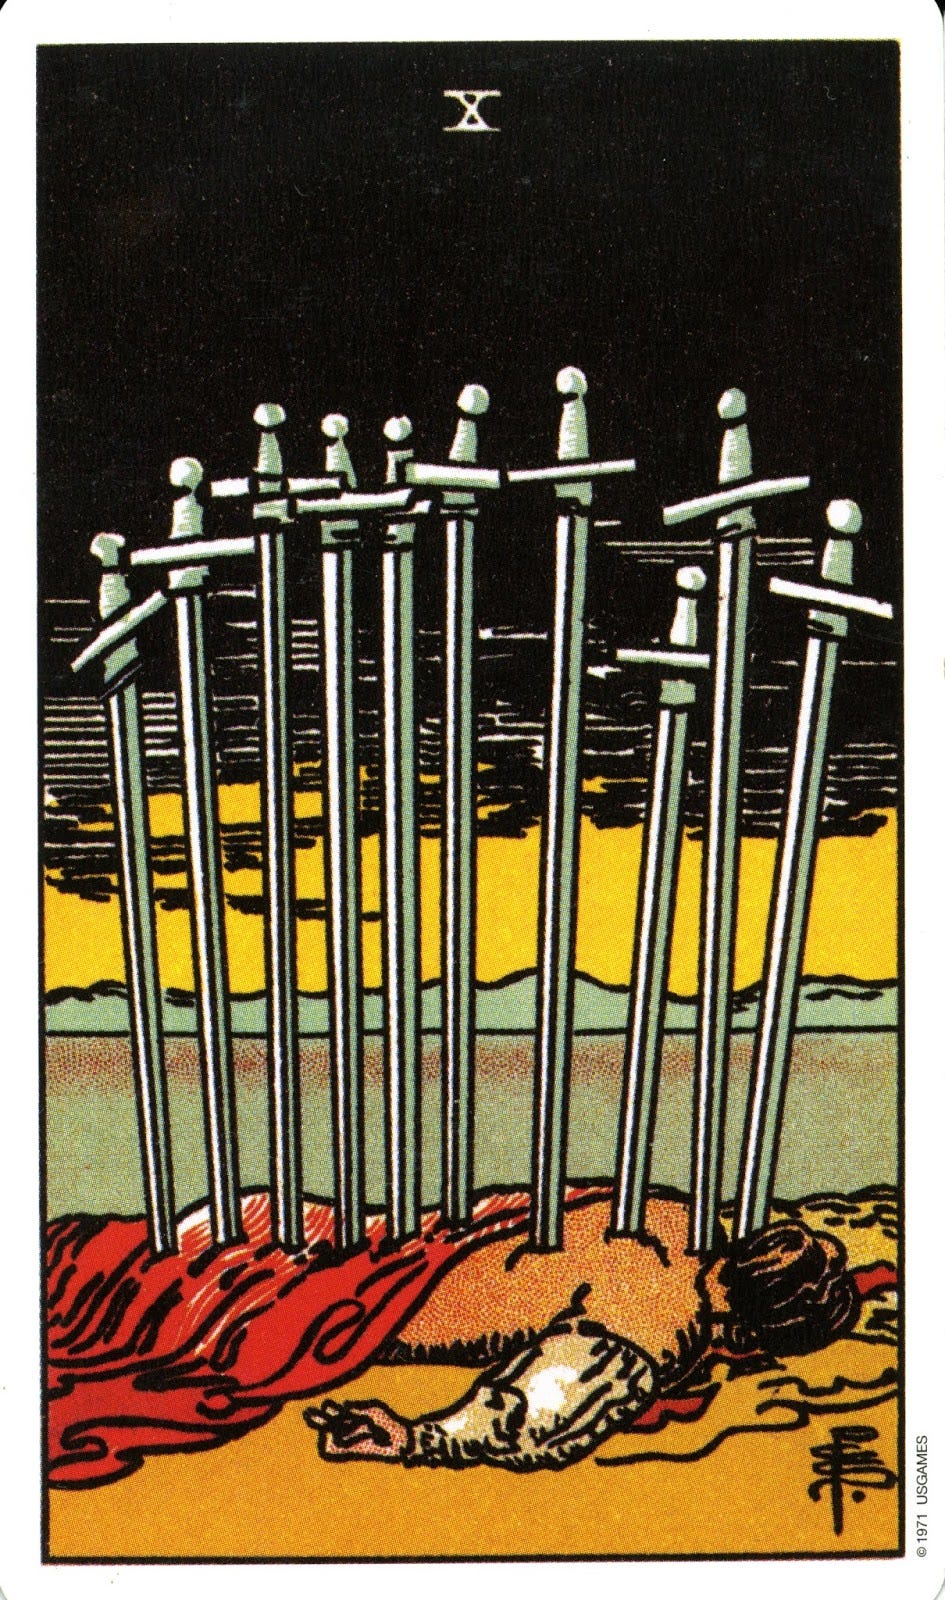 JPG of the Ten of Swords from the Pixie Smith / Rider-Waite tarot deck. A figure lies on the ground beneath a pitch-black sky. Ten swords have been driven through the figure into the Earth. They are in a strange cluster, like a group discussing something.